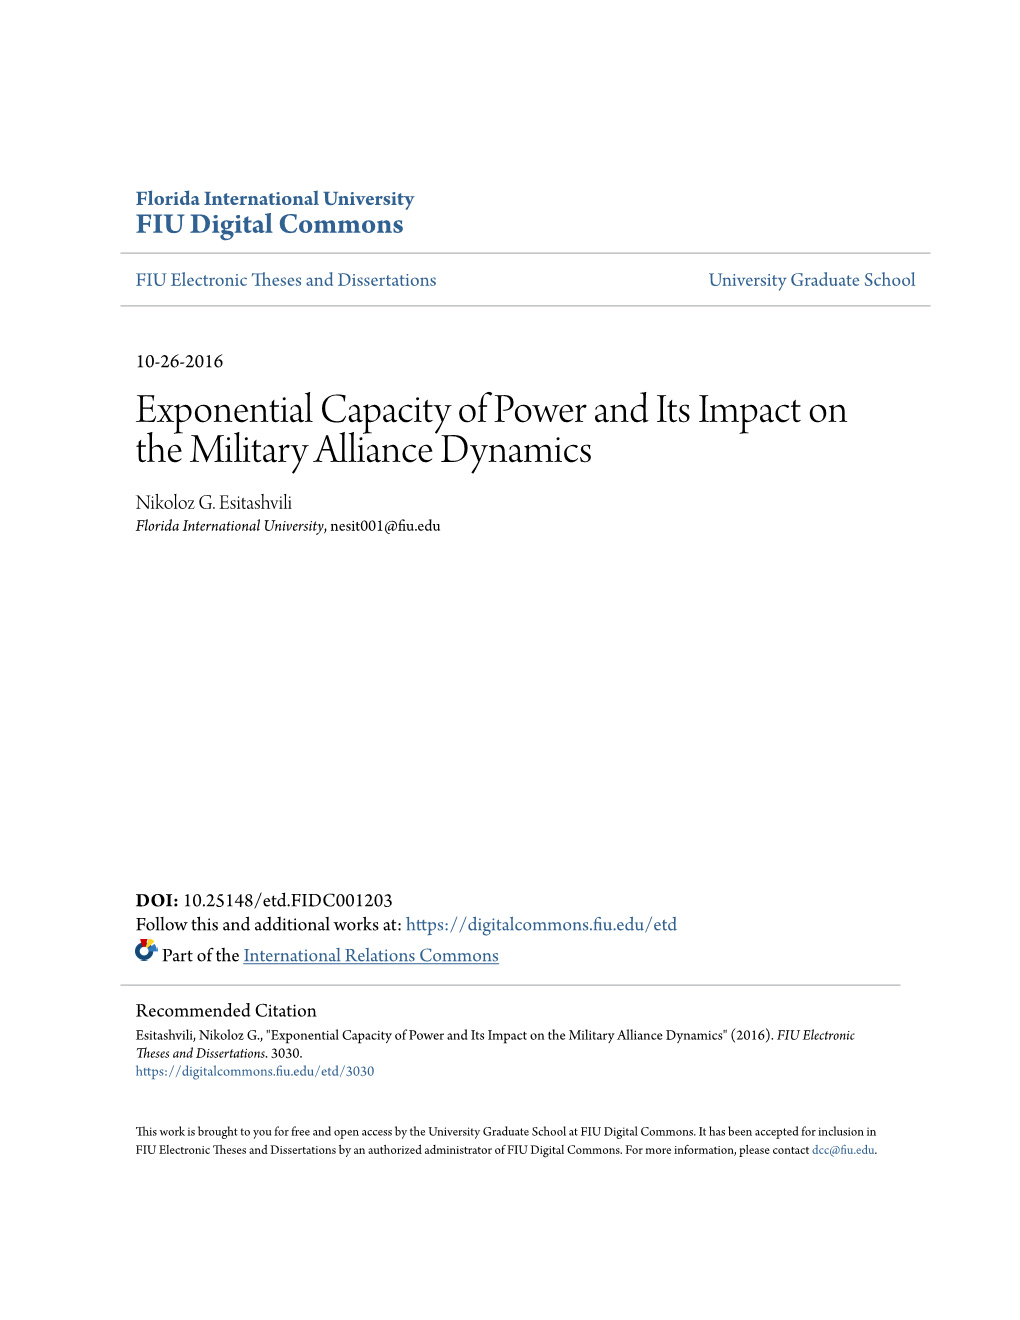 Exponential Capacity of Power and Its Impact on the Military Alliance Dynamics Nikoloz G